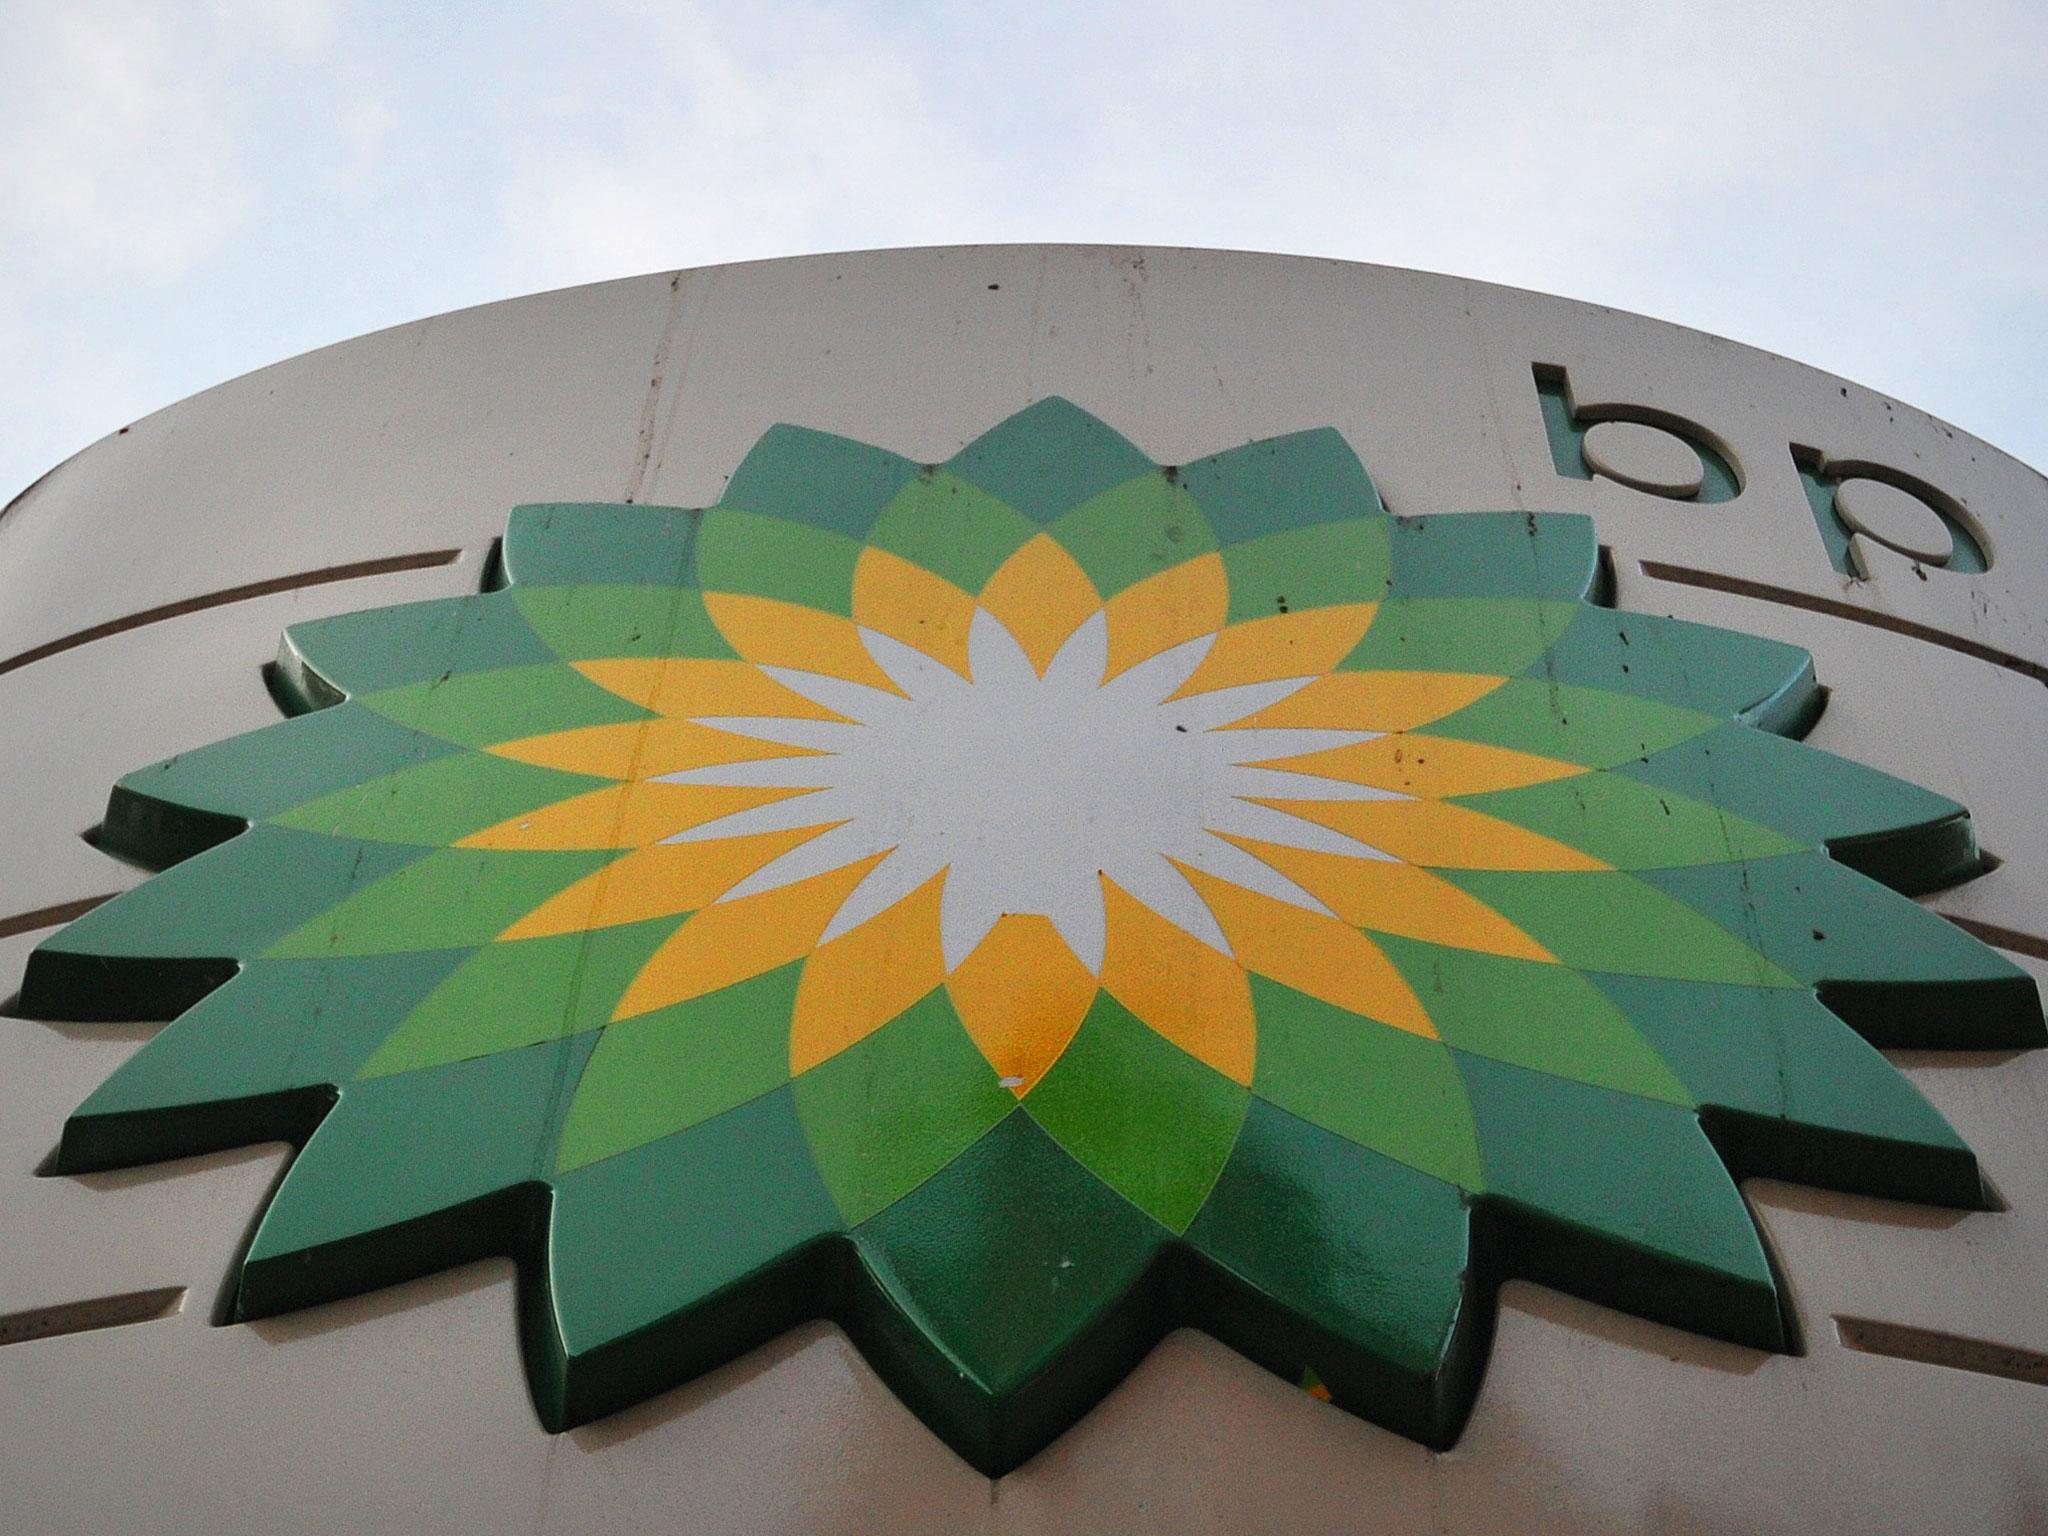 Judge Barbier found BP responsible for 67 per cent of the blame